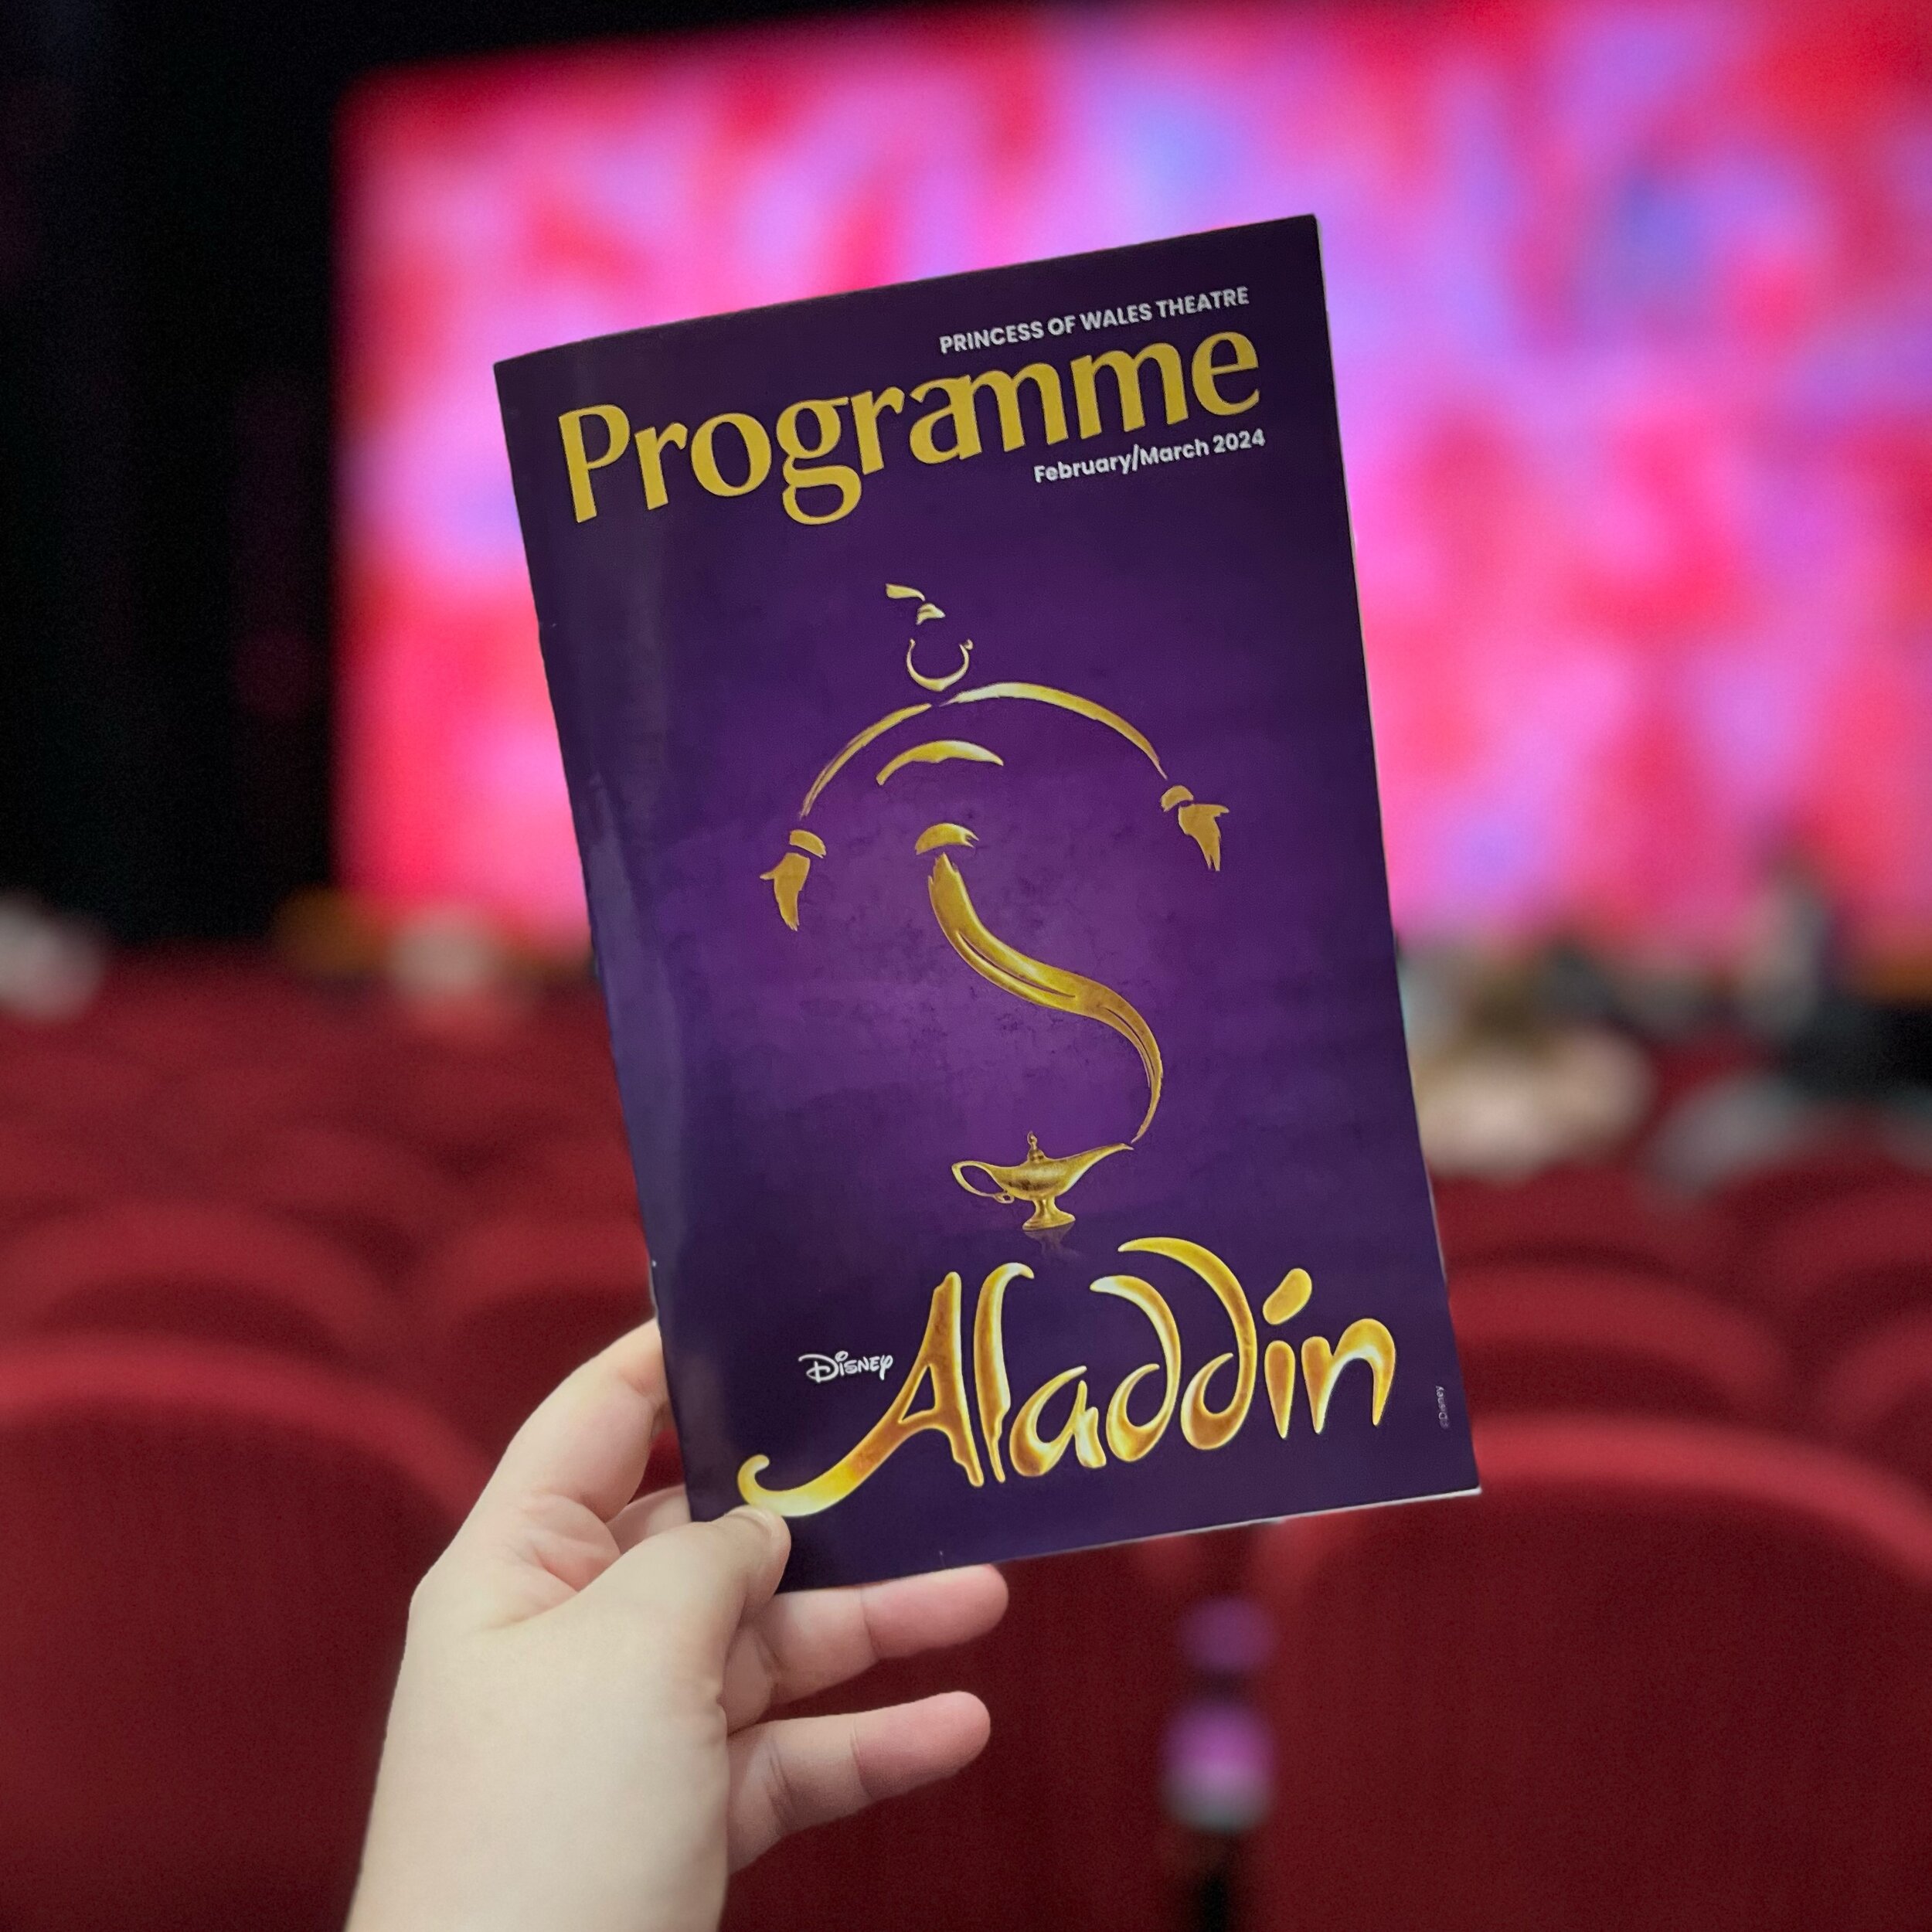 We saw #Aladdin this weekend at #MirvishProductions. It was absolutely incredible. The costumes, the music, and the casting were perfect. Our only complaint is there was a ton of forced pop culture references that took us out of the immersion (and al